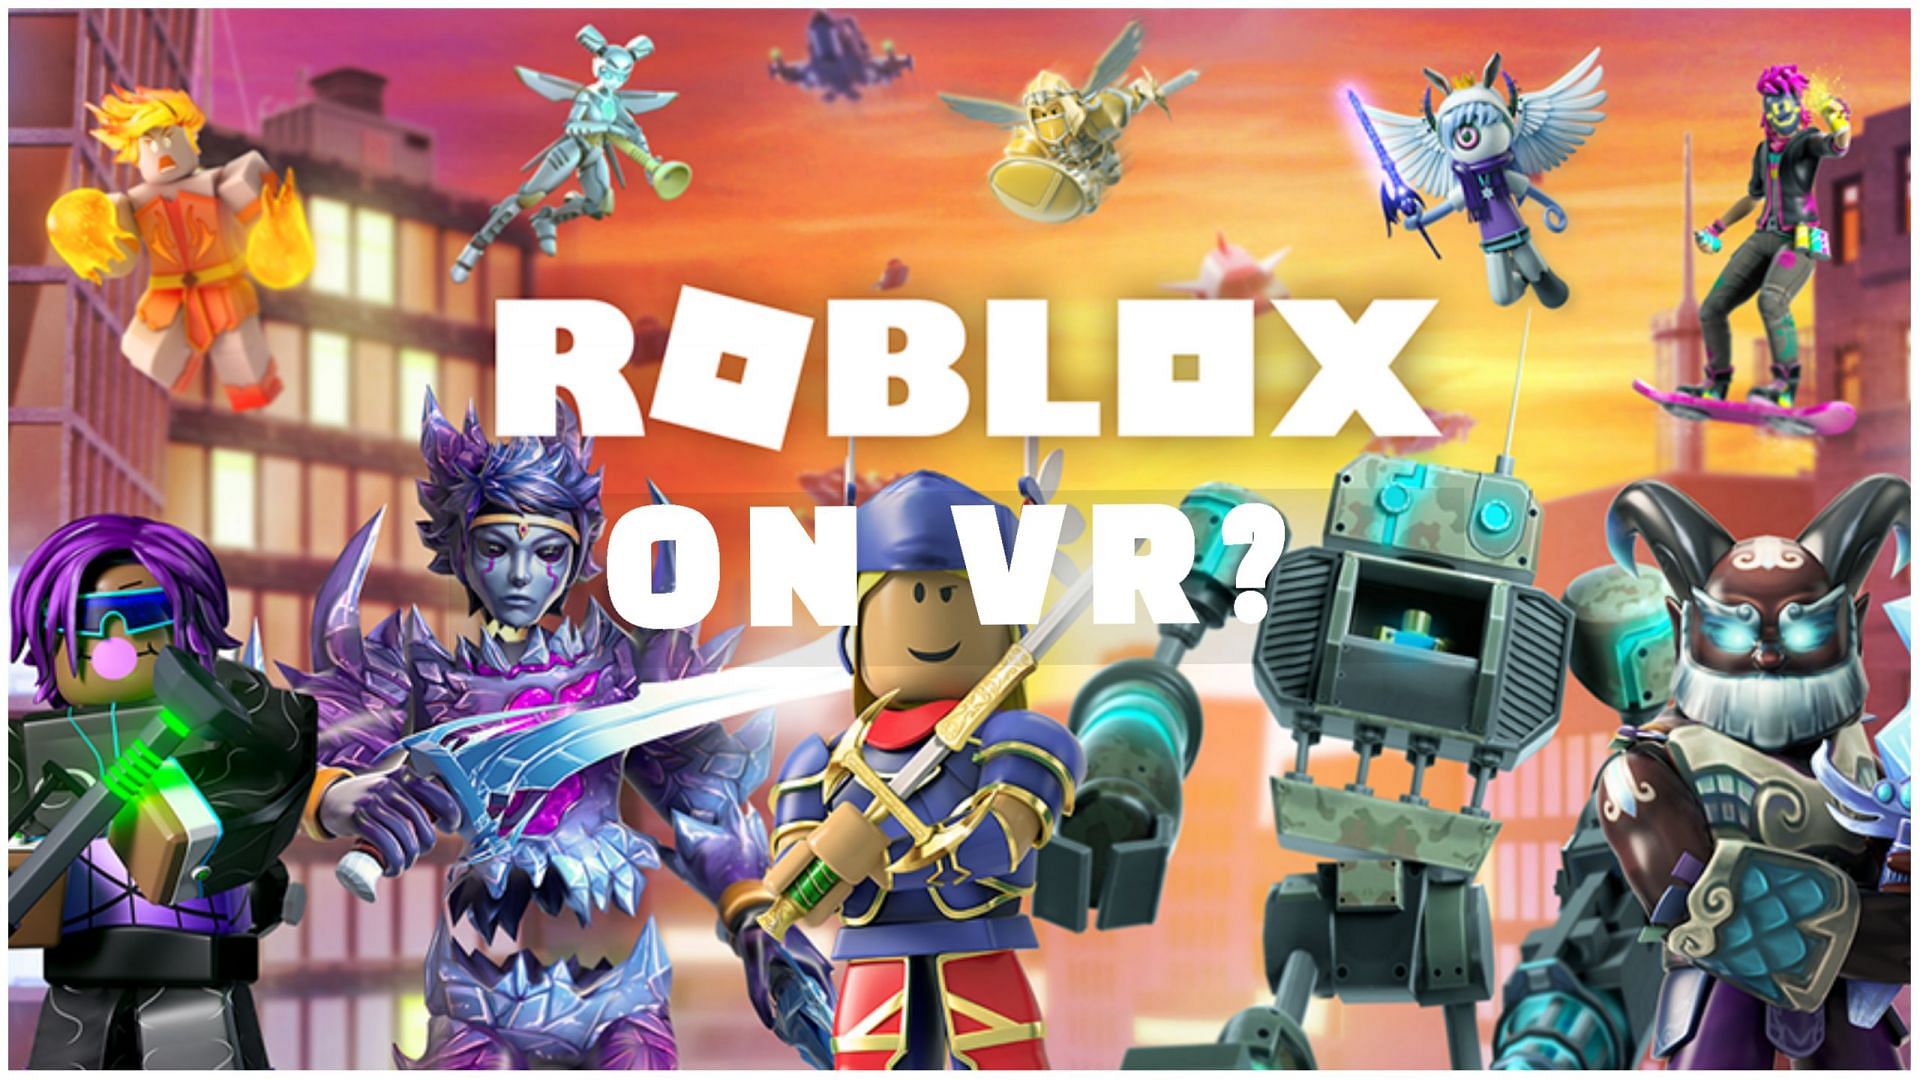 How to login to Roblox on Quest 2 & Pro